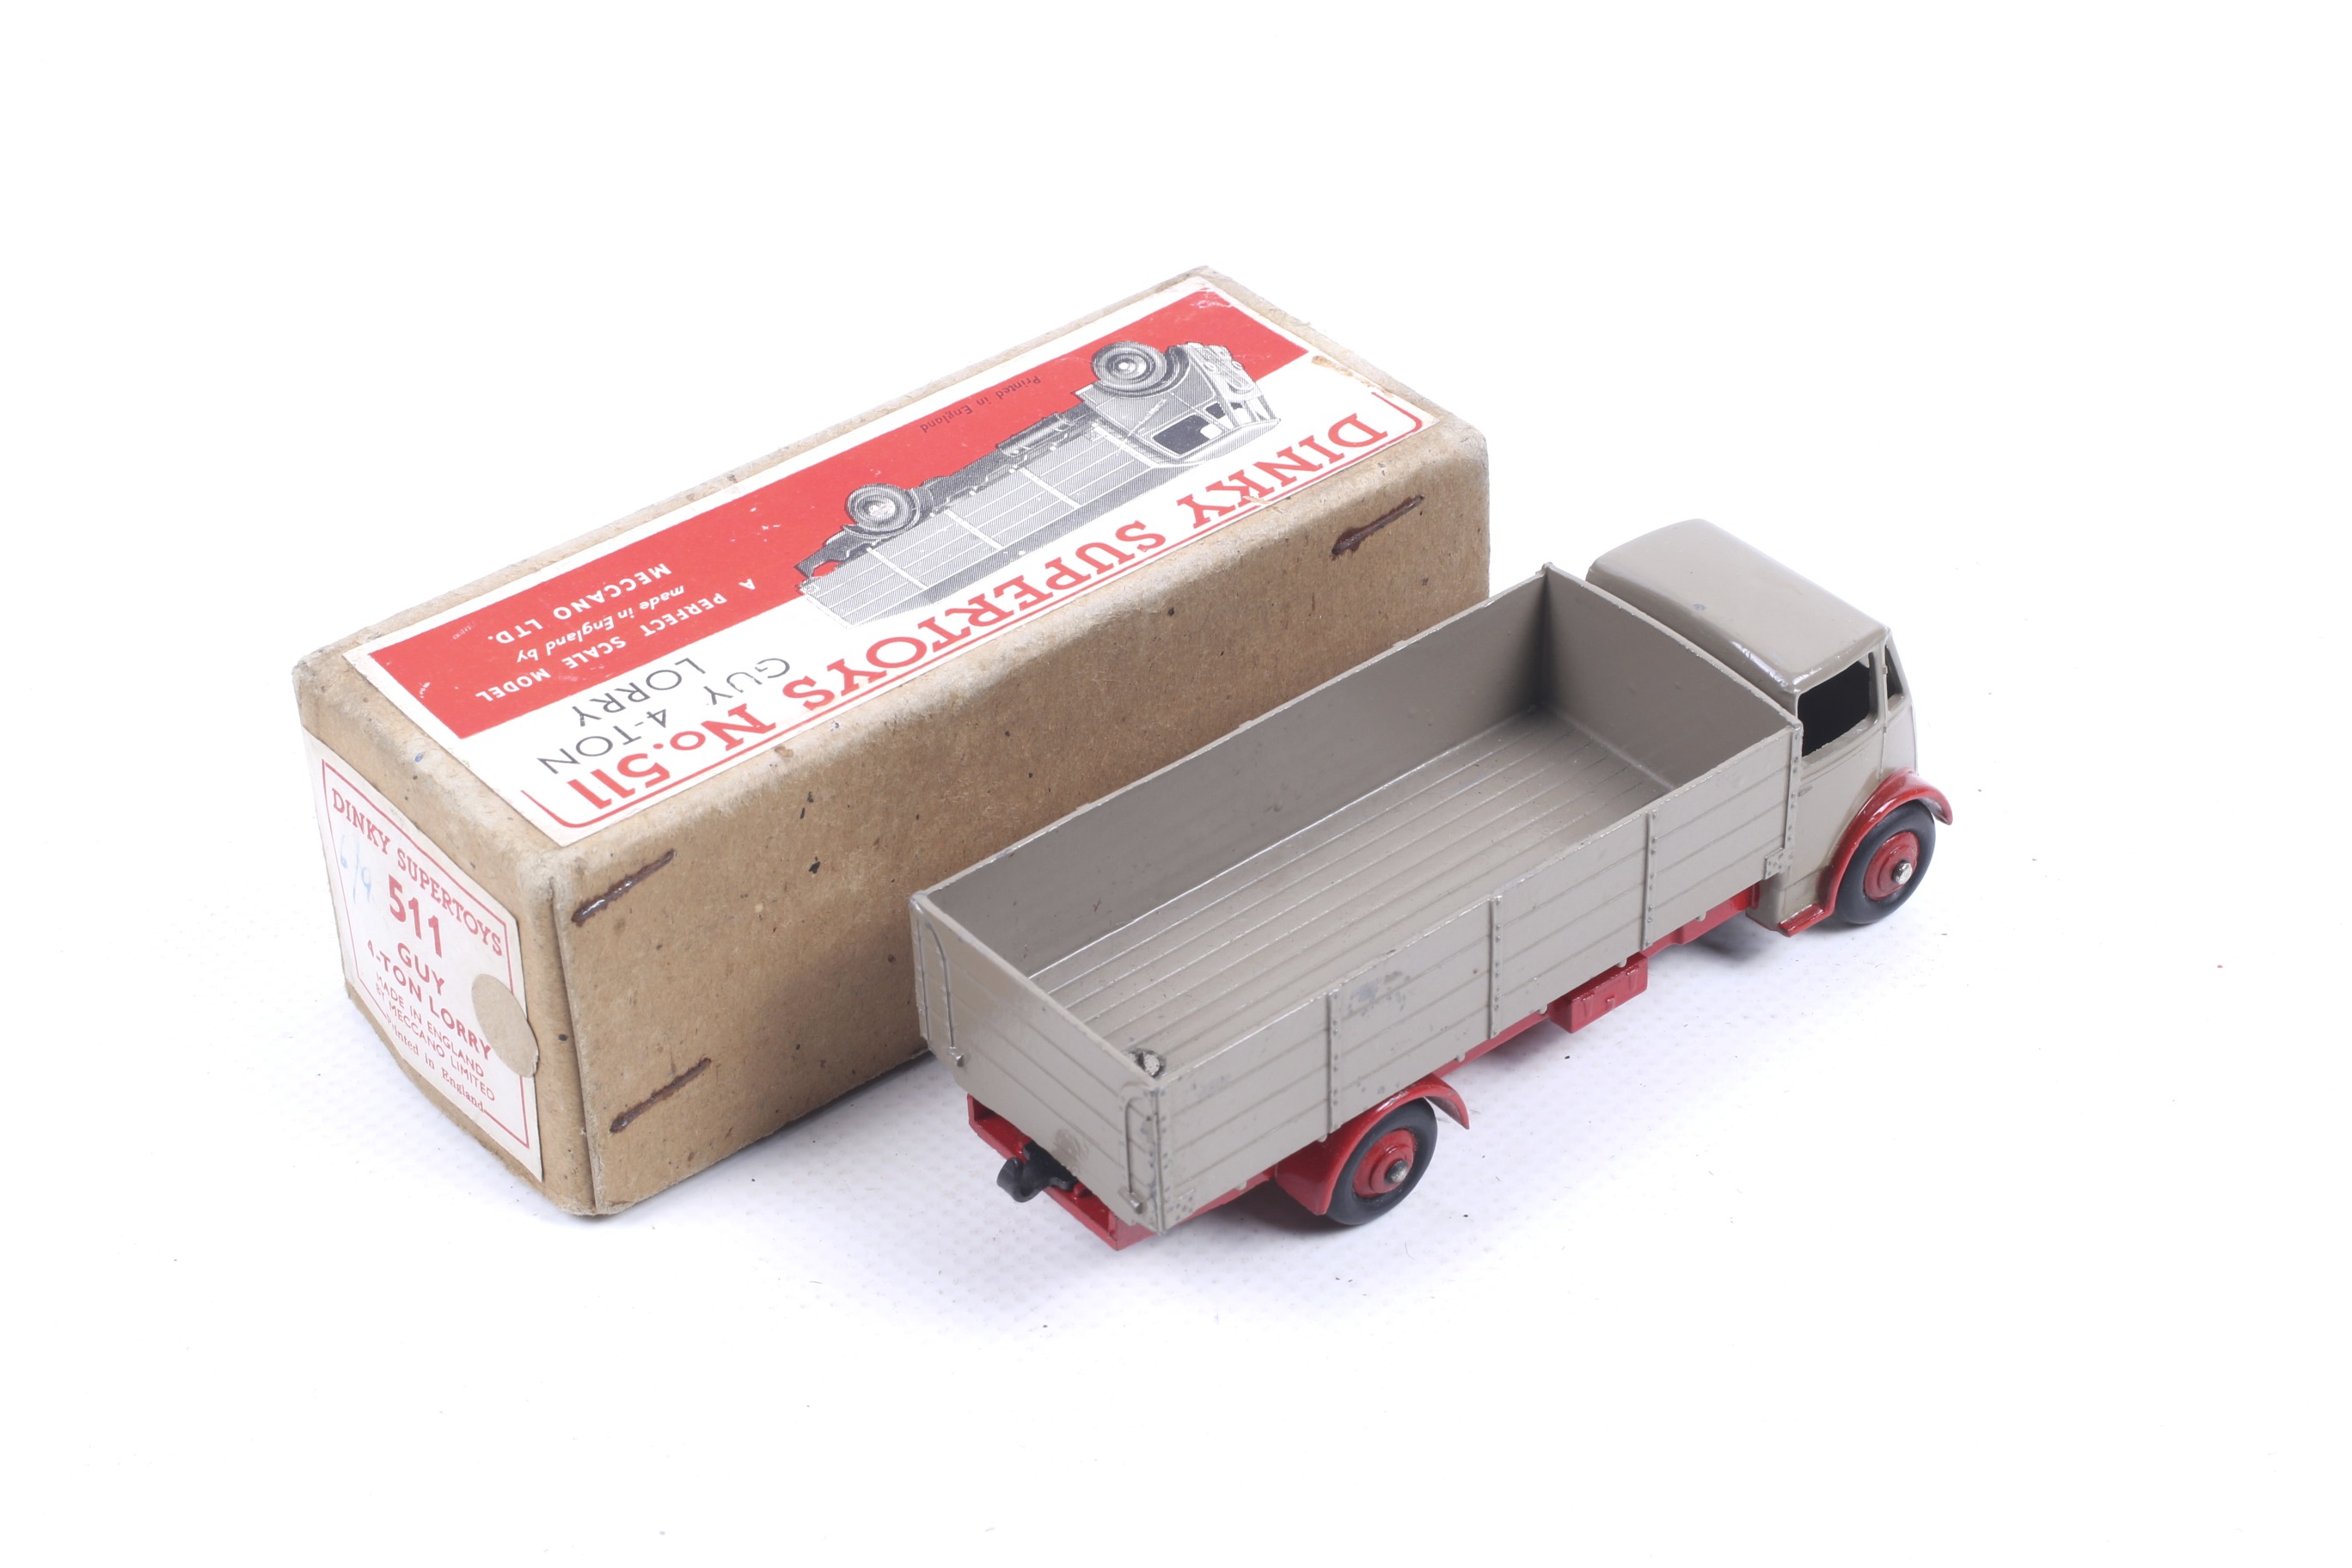 A Dinky diecast Guy 4-Ton lorry. No. 51, red and grey body, in original box. - Image 2 of 2